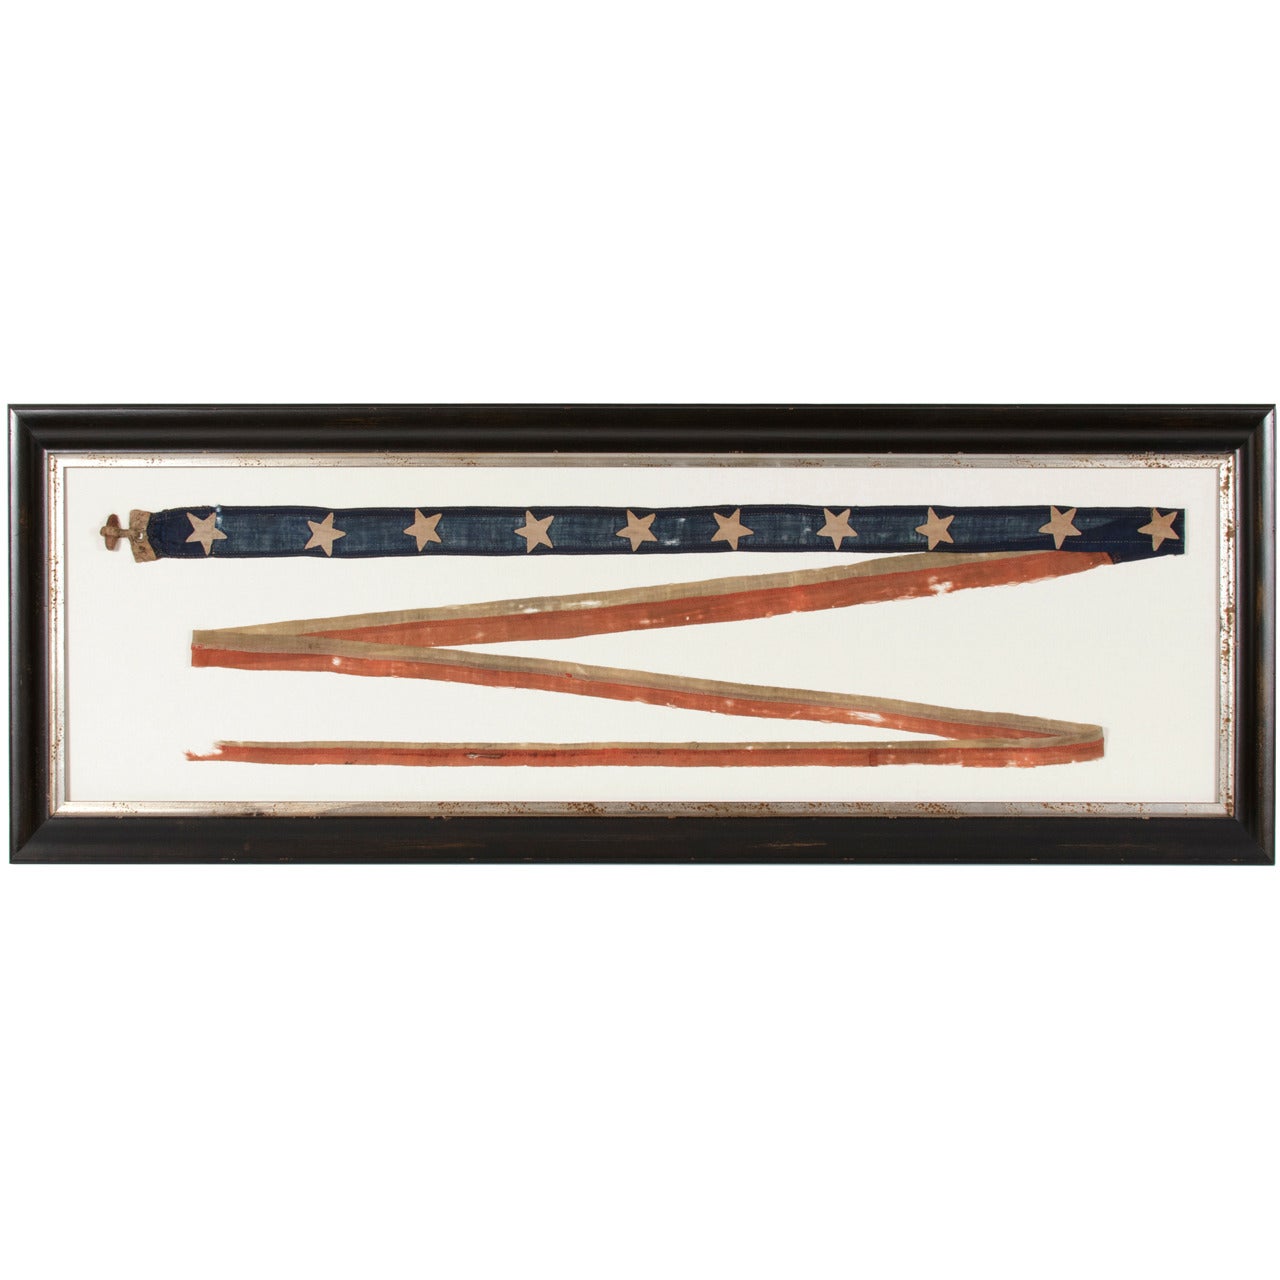 U.S. Navy Homeward-Bound or Commissioning Pennant with 10 Stars